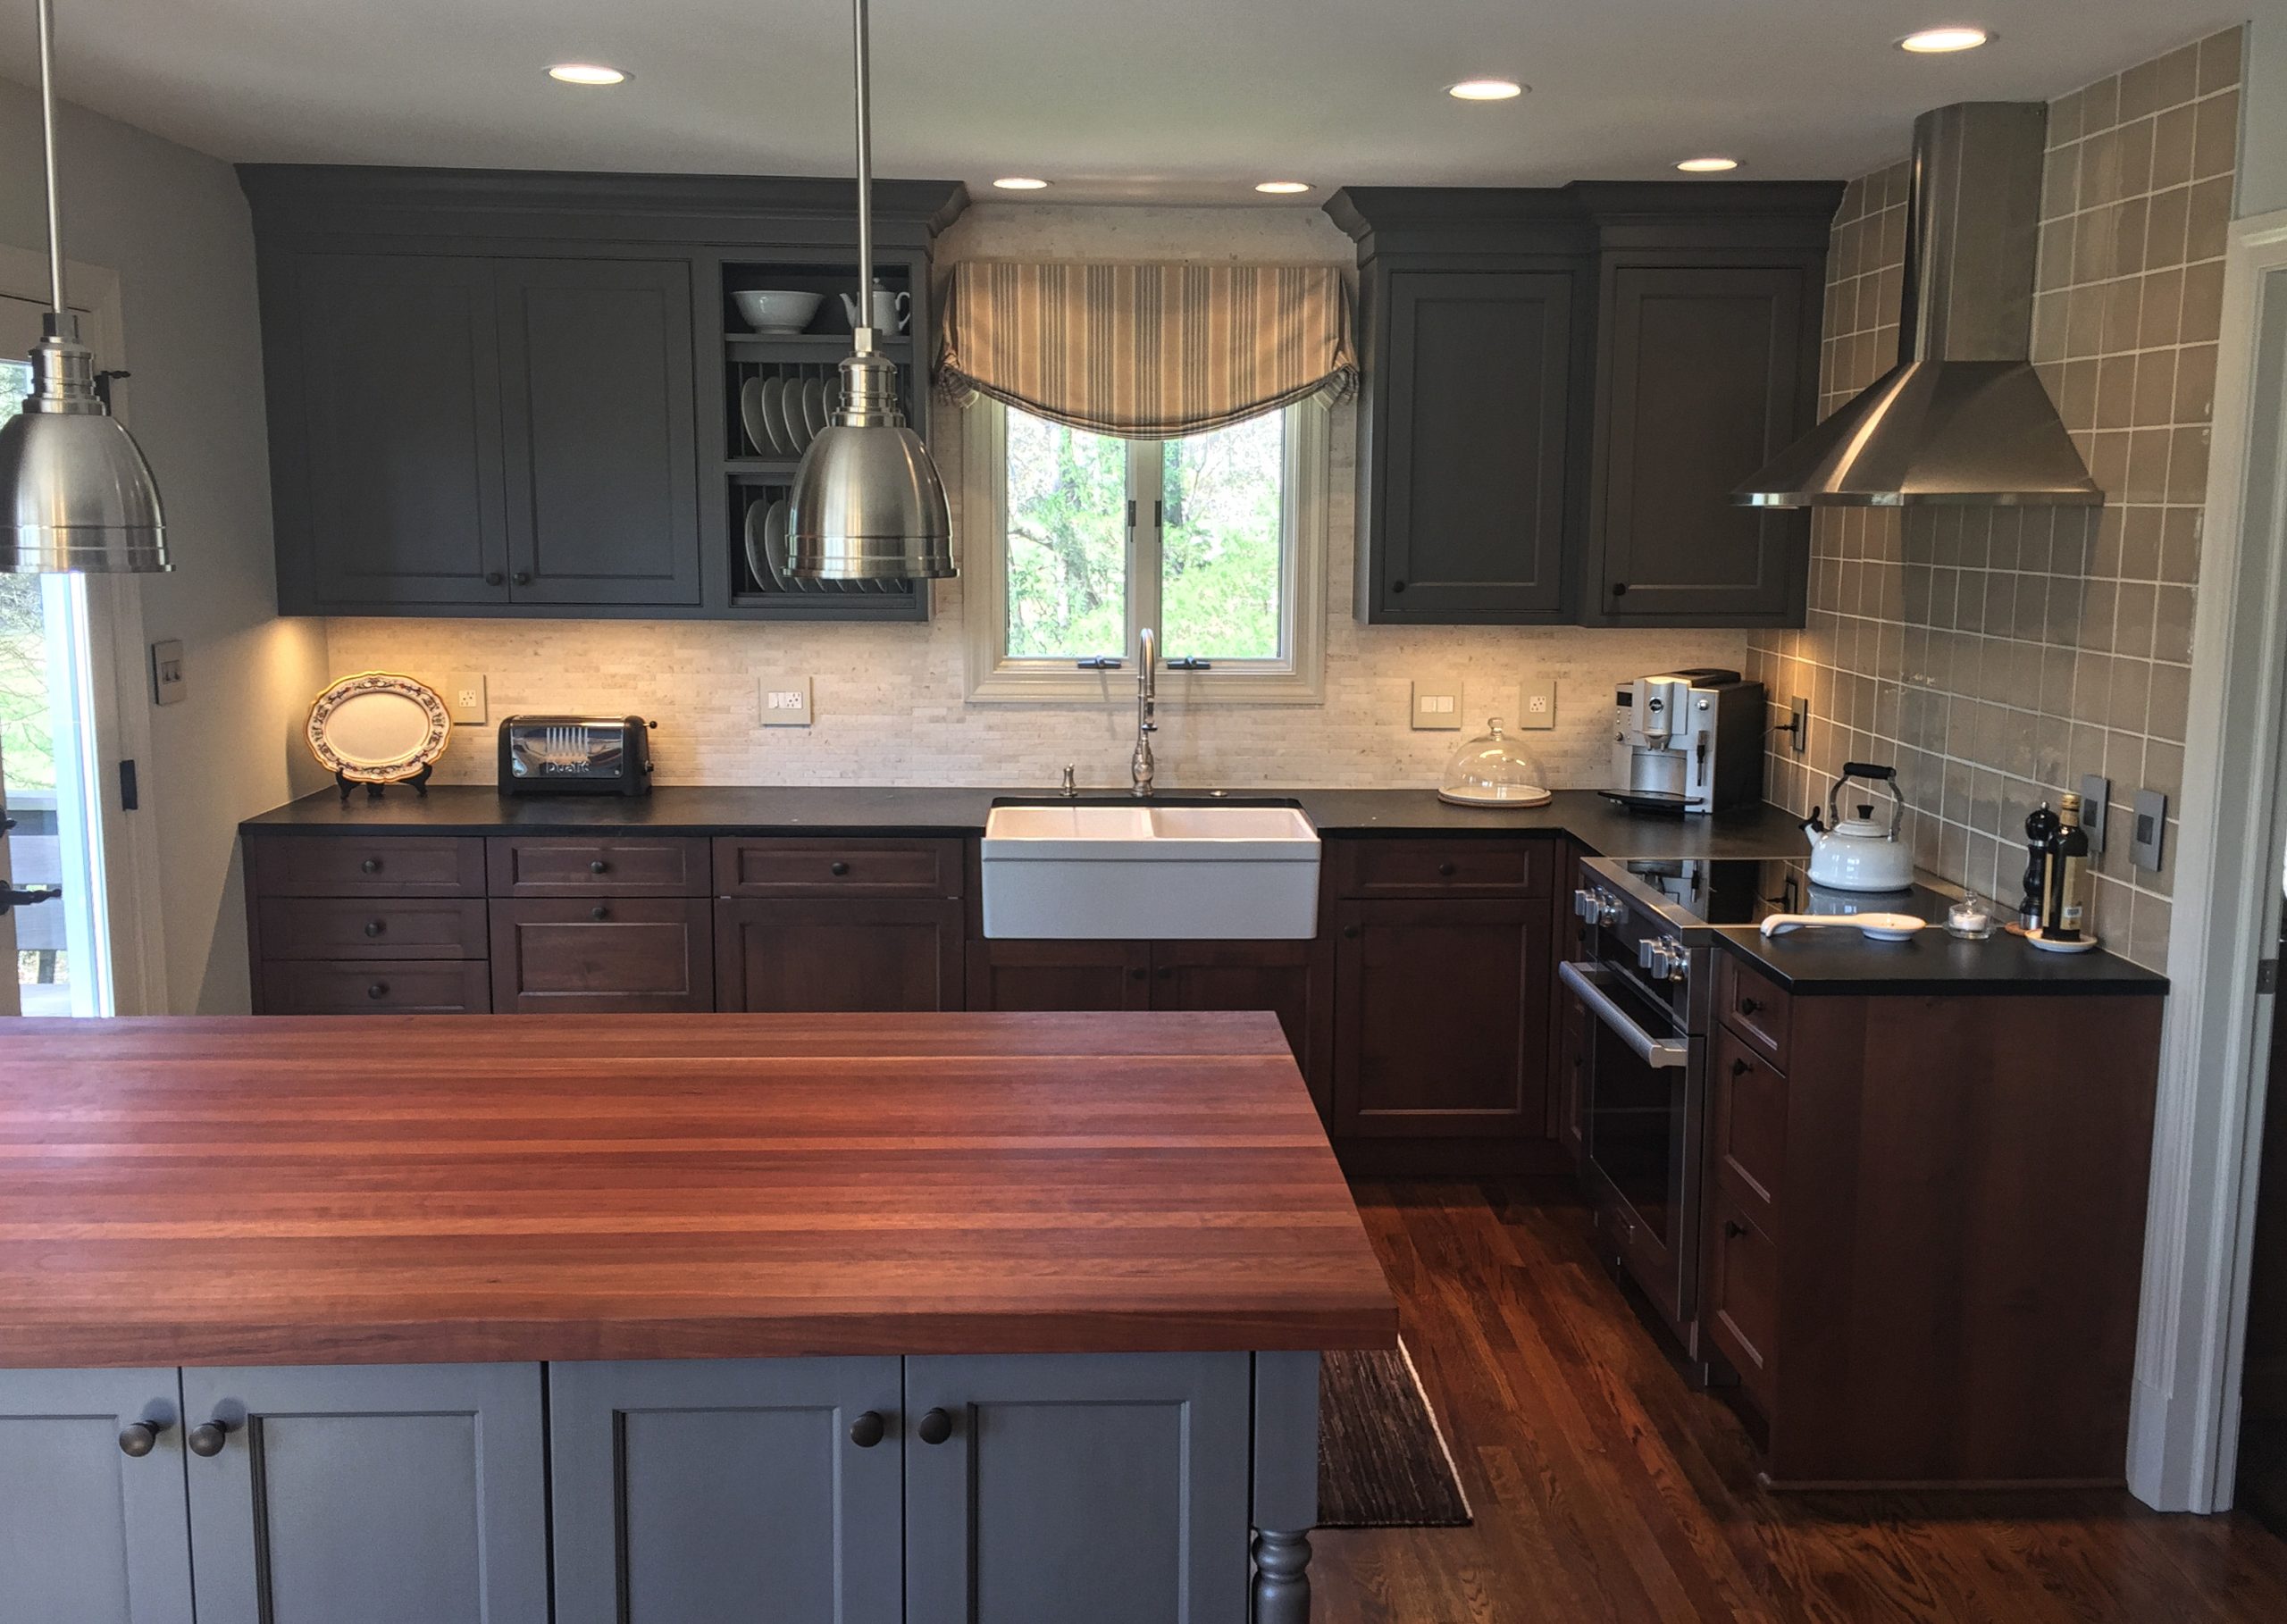 A recently completed kitchen